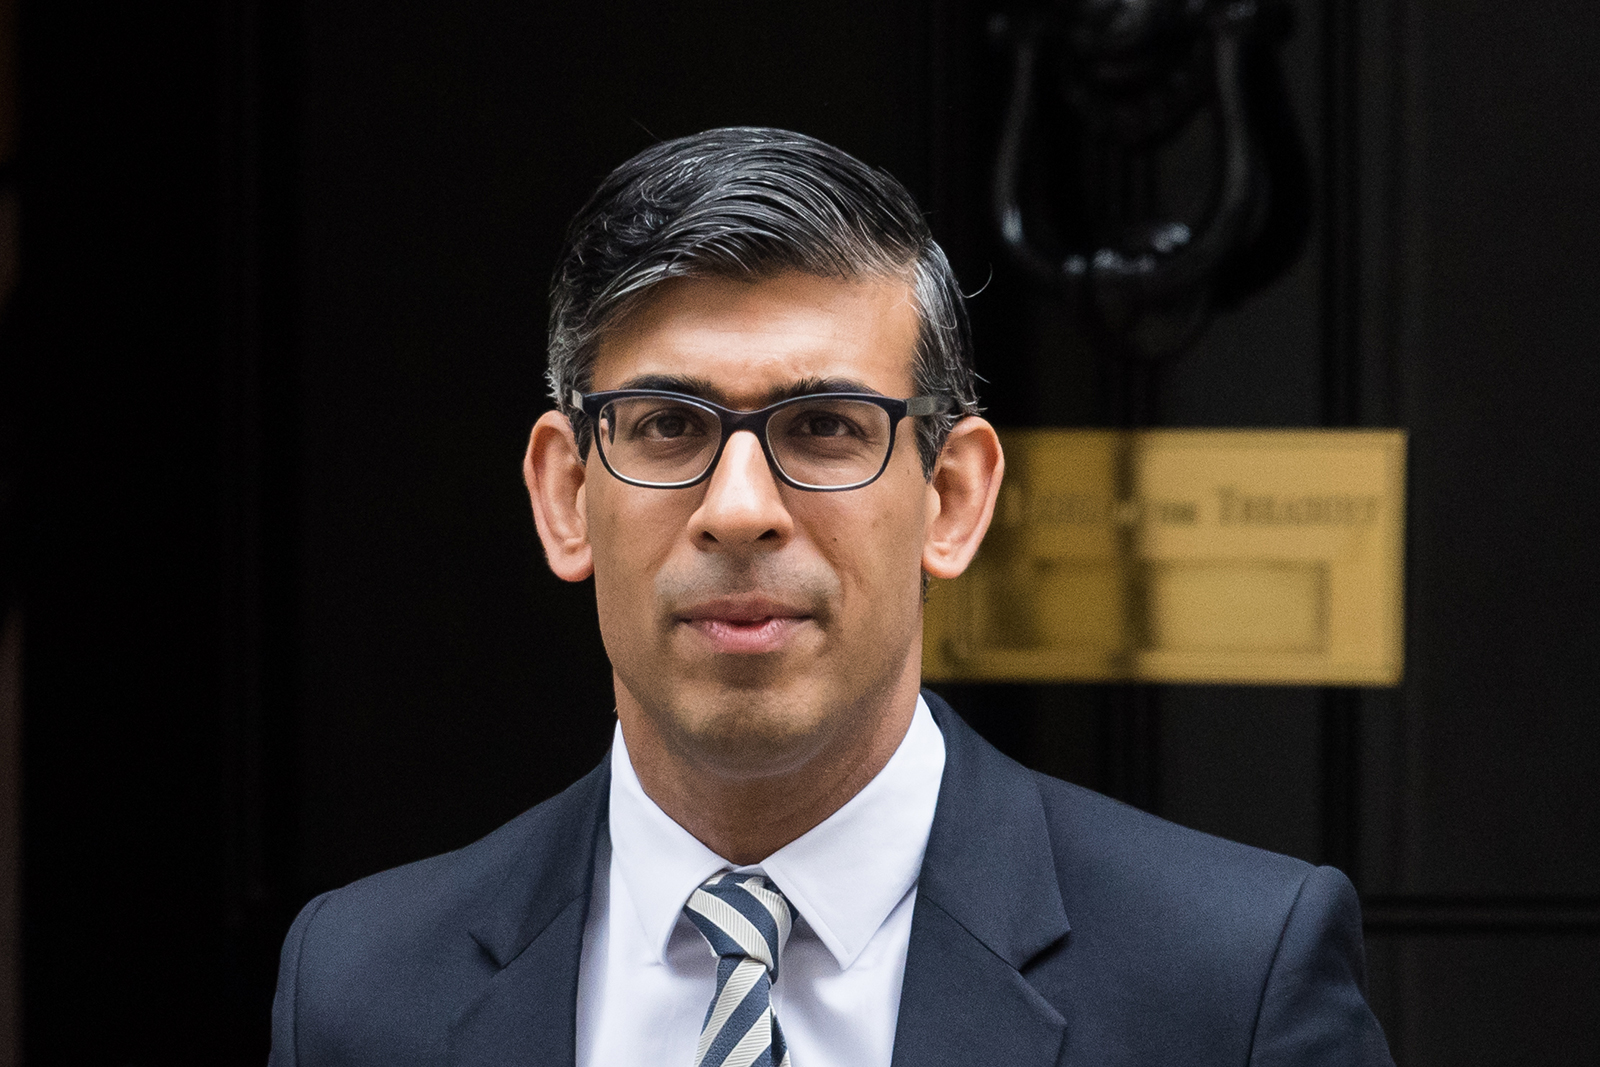 Rishi Sunak departs 10 Downing Street for the House of Commons to attend the weekly Prime Minister's Questions (PMQs) in London, United Kingdom on April 26, 2023. (Photo credit should read Wiktor Szymanowicz/Future Publishing via Getty Images)